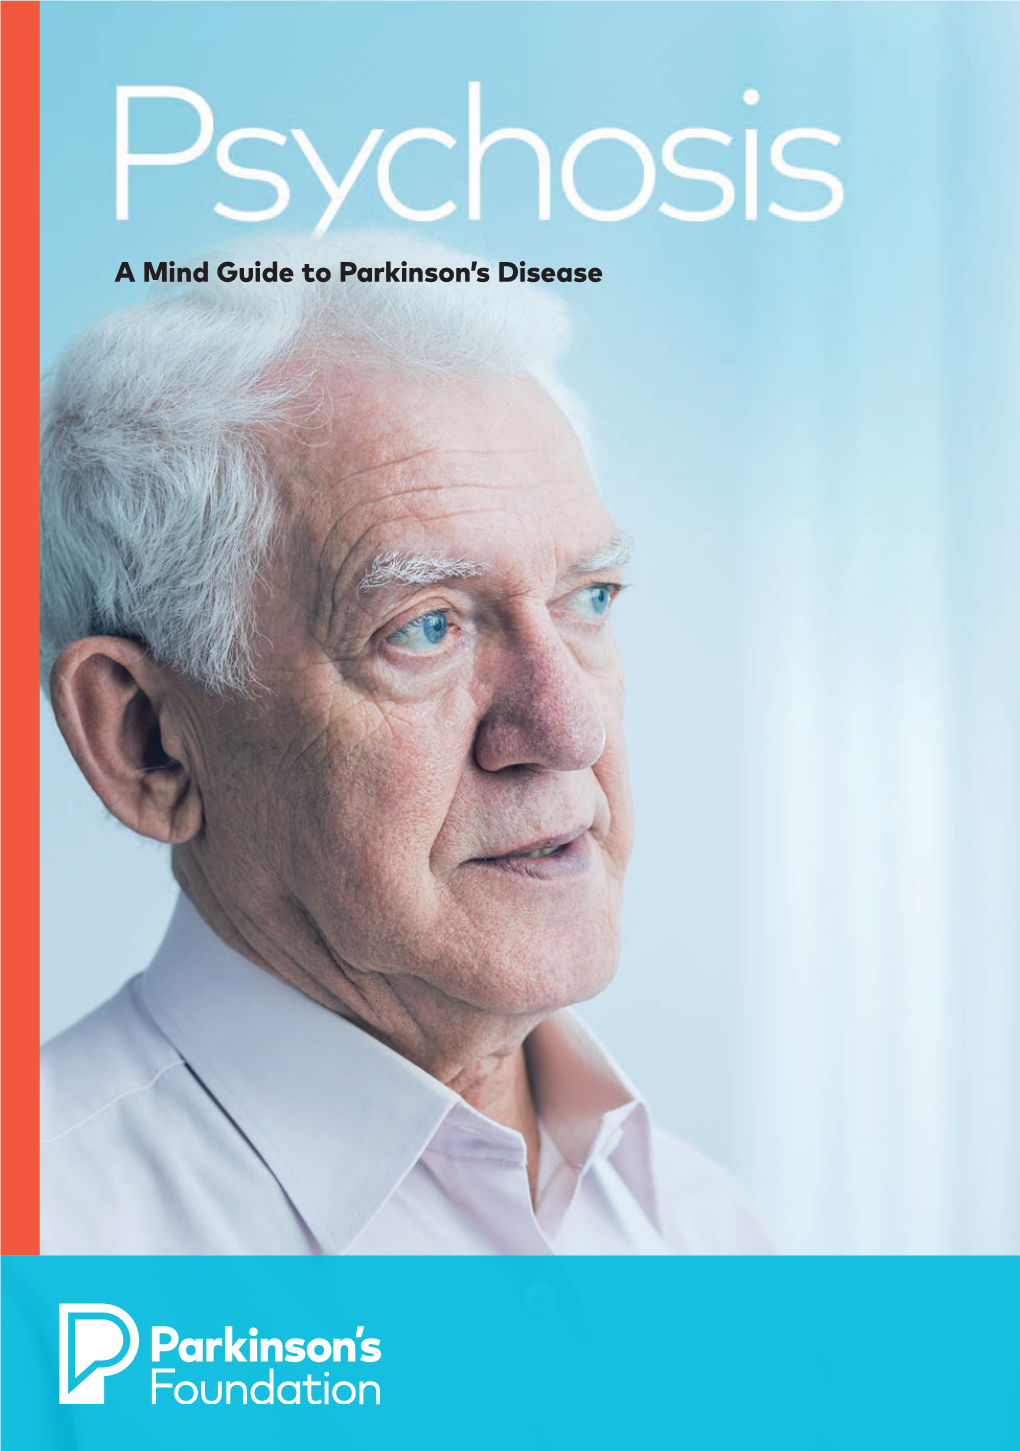 A Mind Guide to Parkinson's Disease